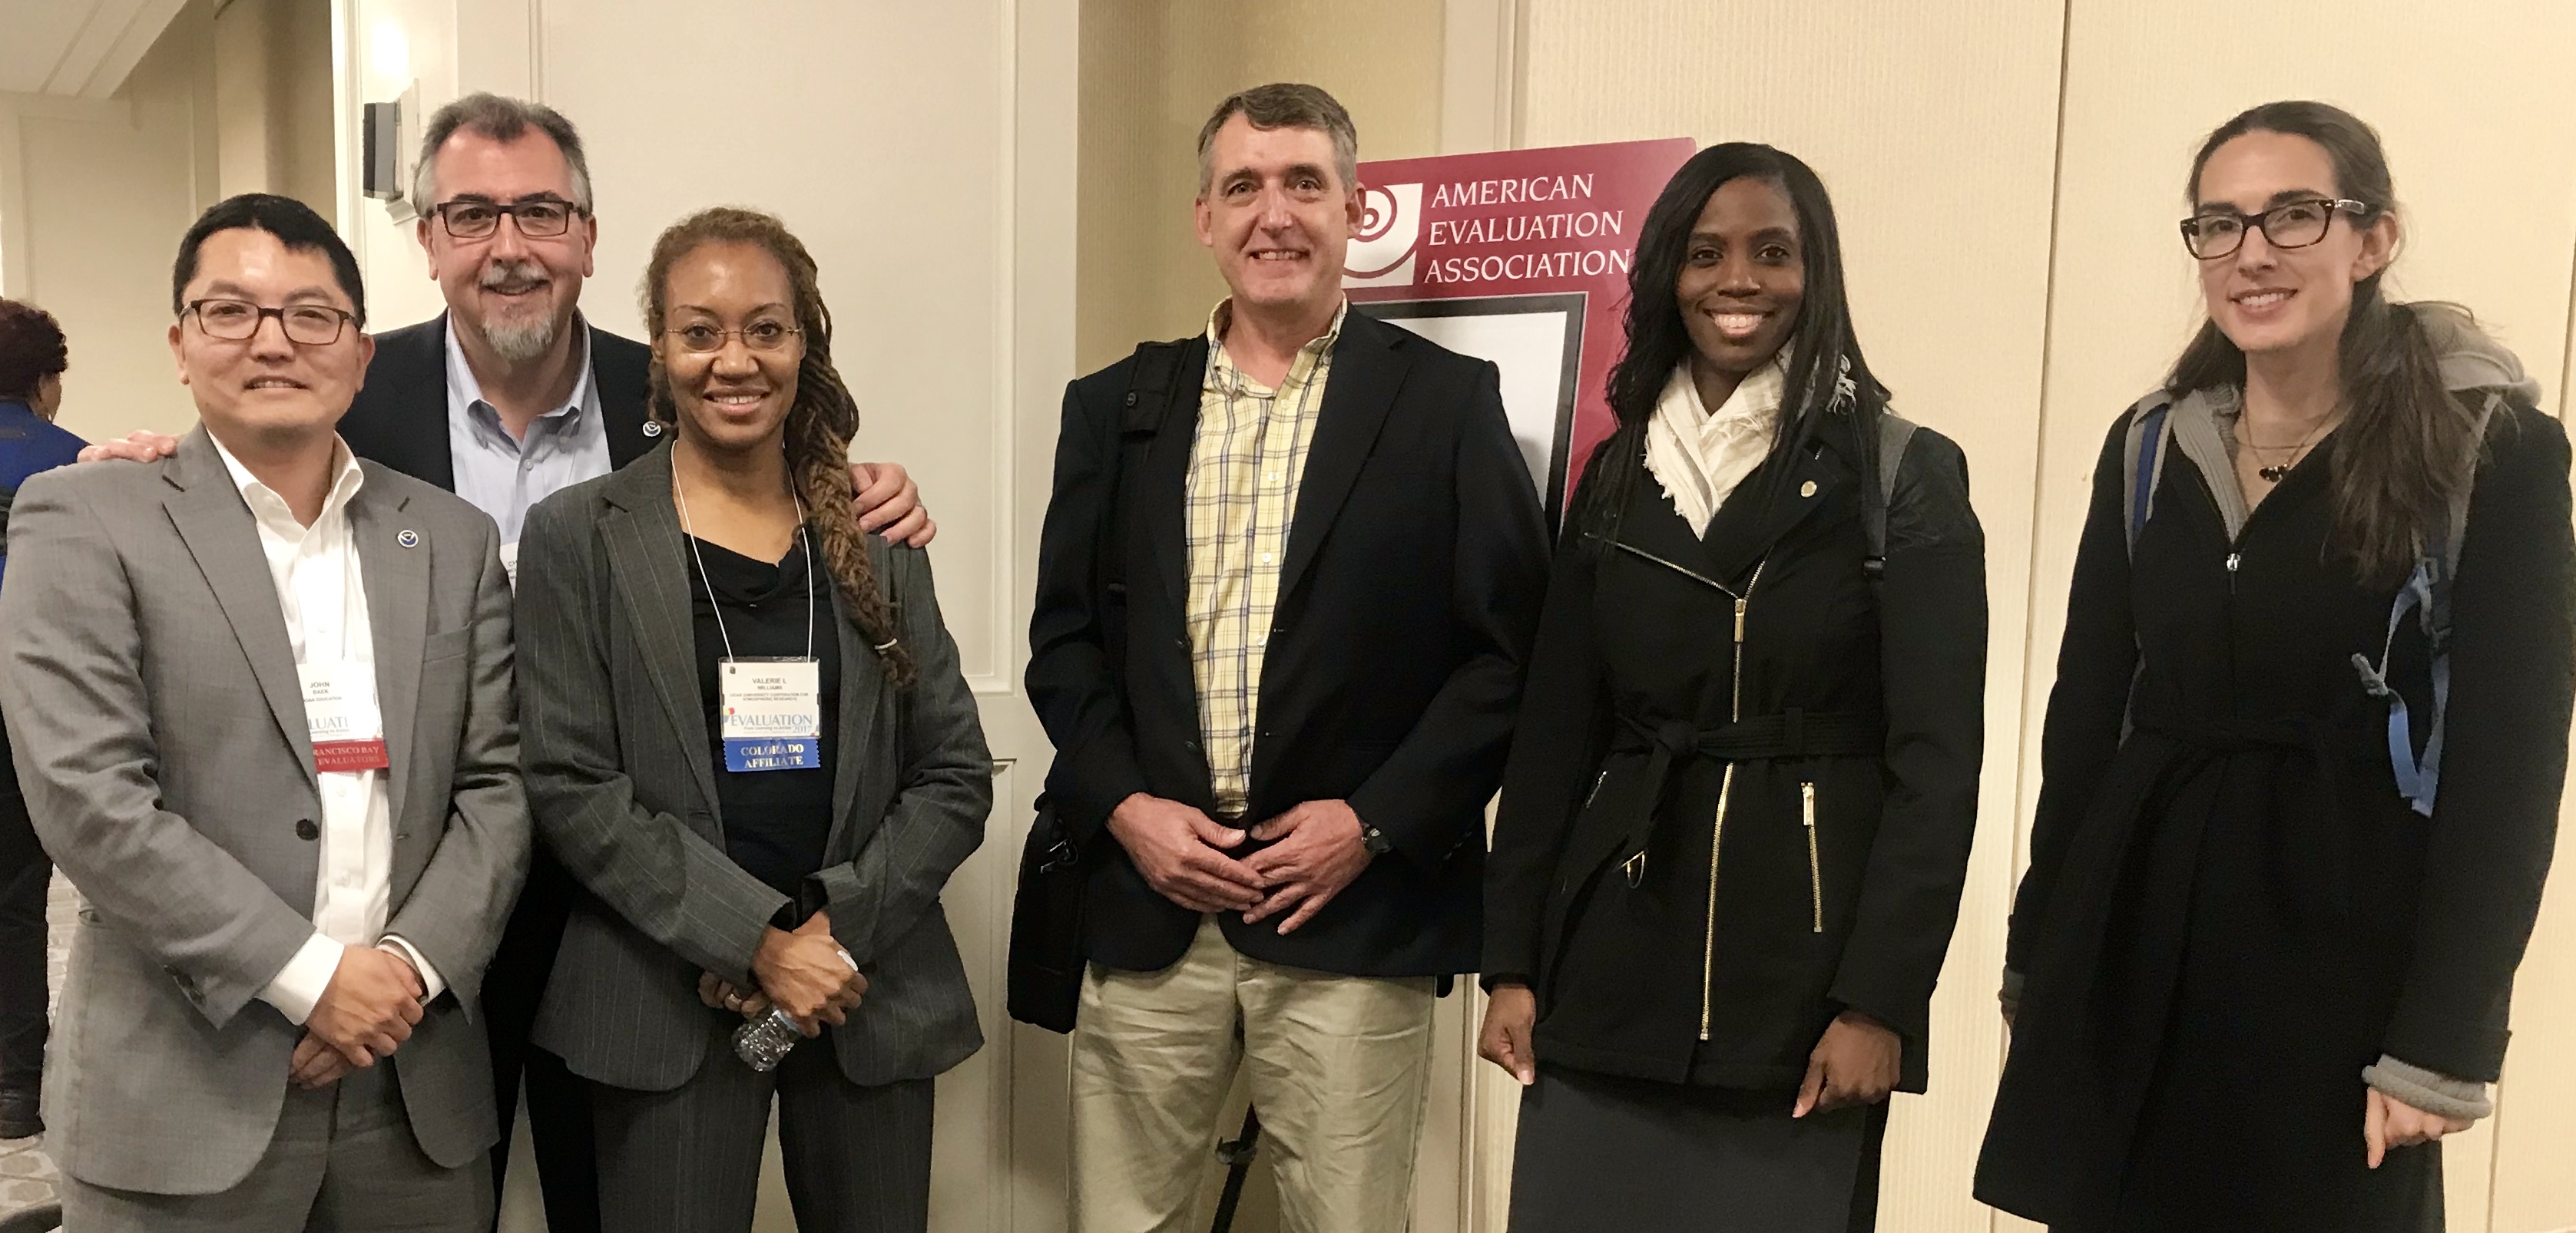 NOAA Office of Education presenters, John Baek, Christos Michalopoulos, Valerie Williams, Steve Storck, Jessica Cooper, Marissa Jones (left to right) at American Evaluation Association on November 11, 2017 in Washington, DC. Panel titled, "Five Not-so-easy Pieces: From Strategic Planning to Performance Measurement."